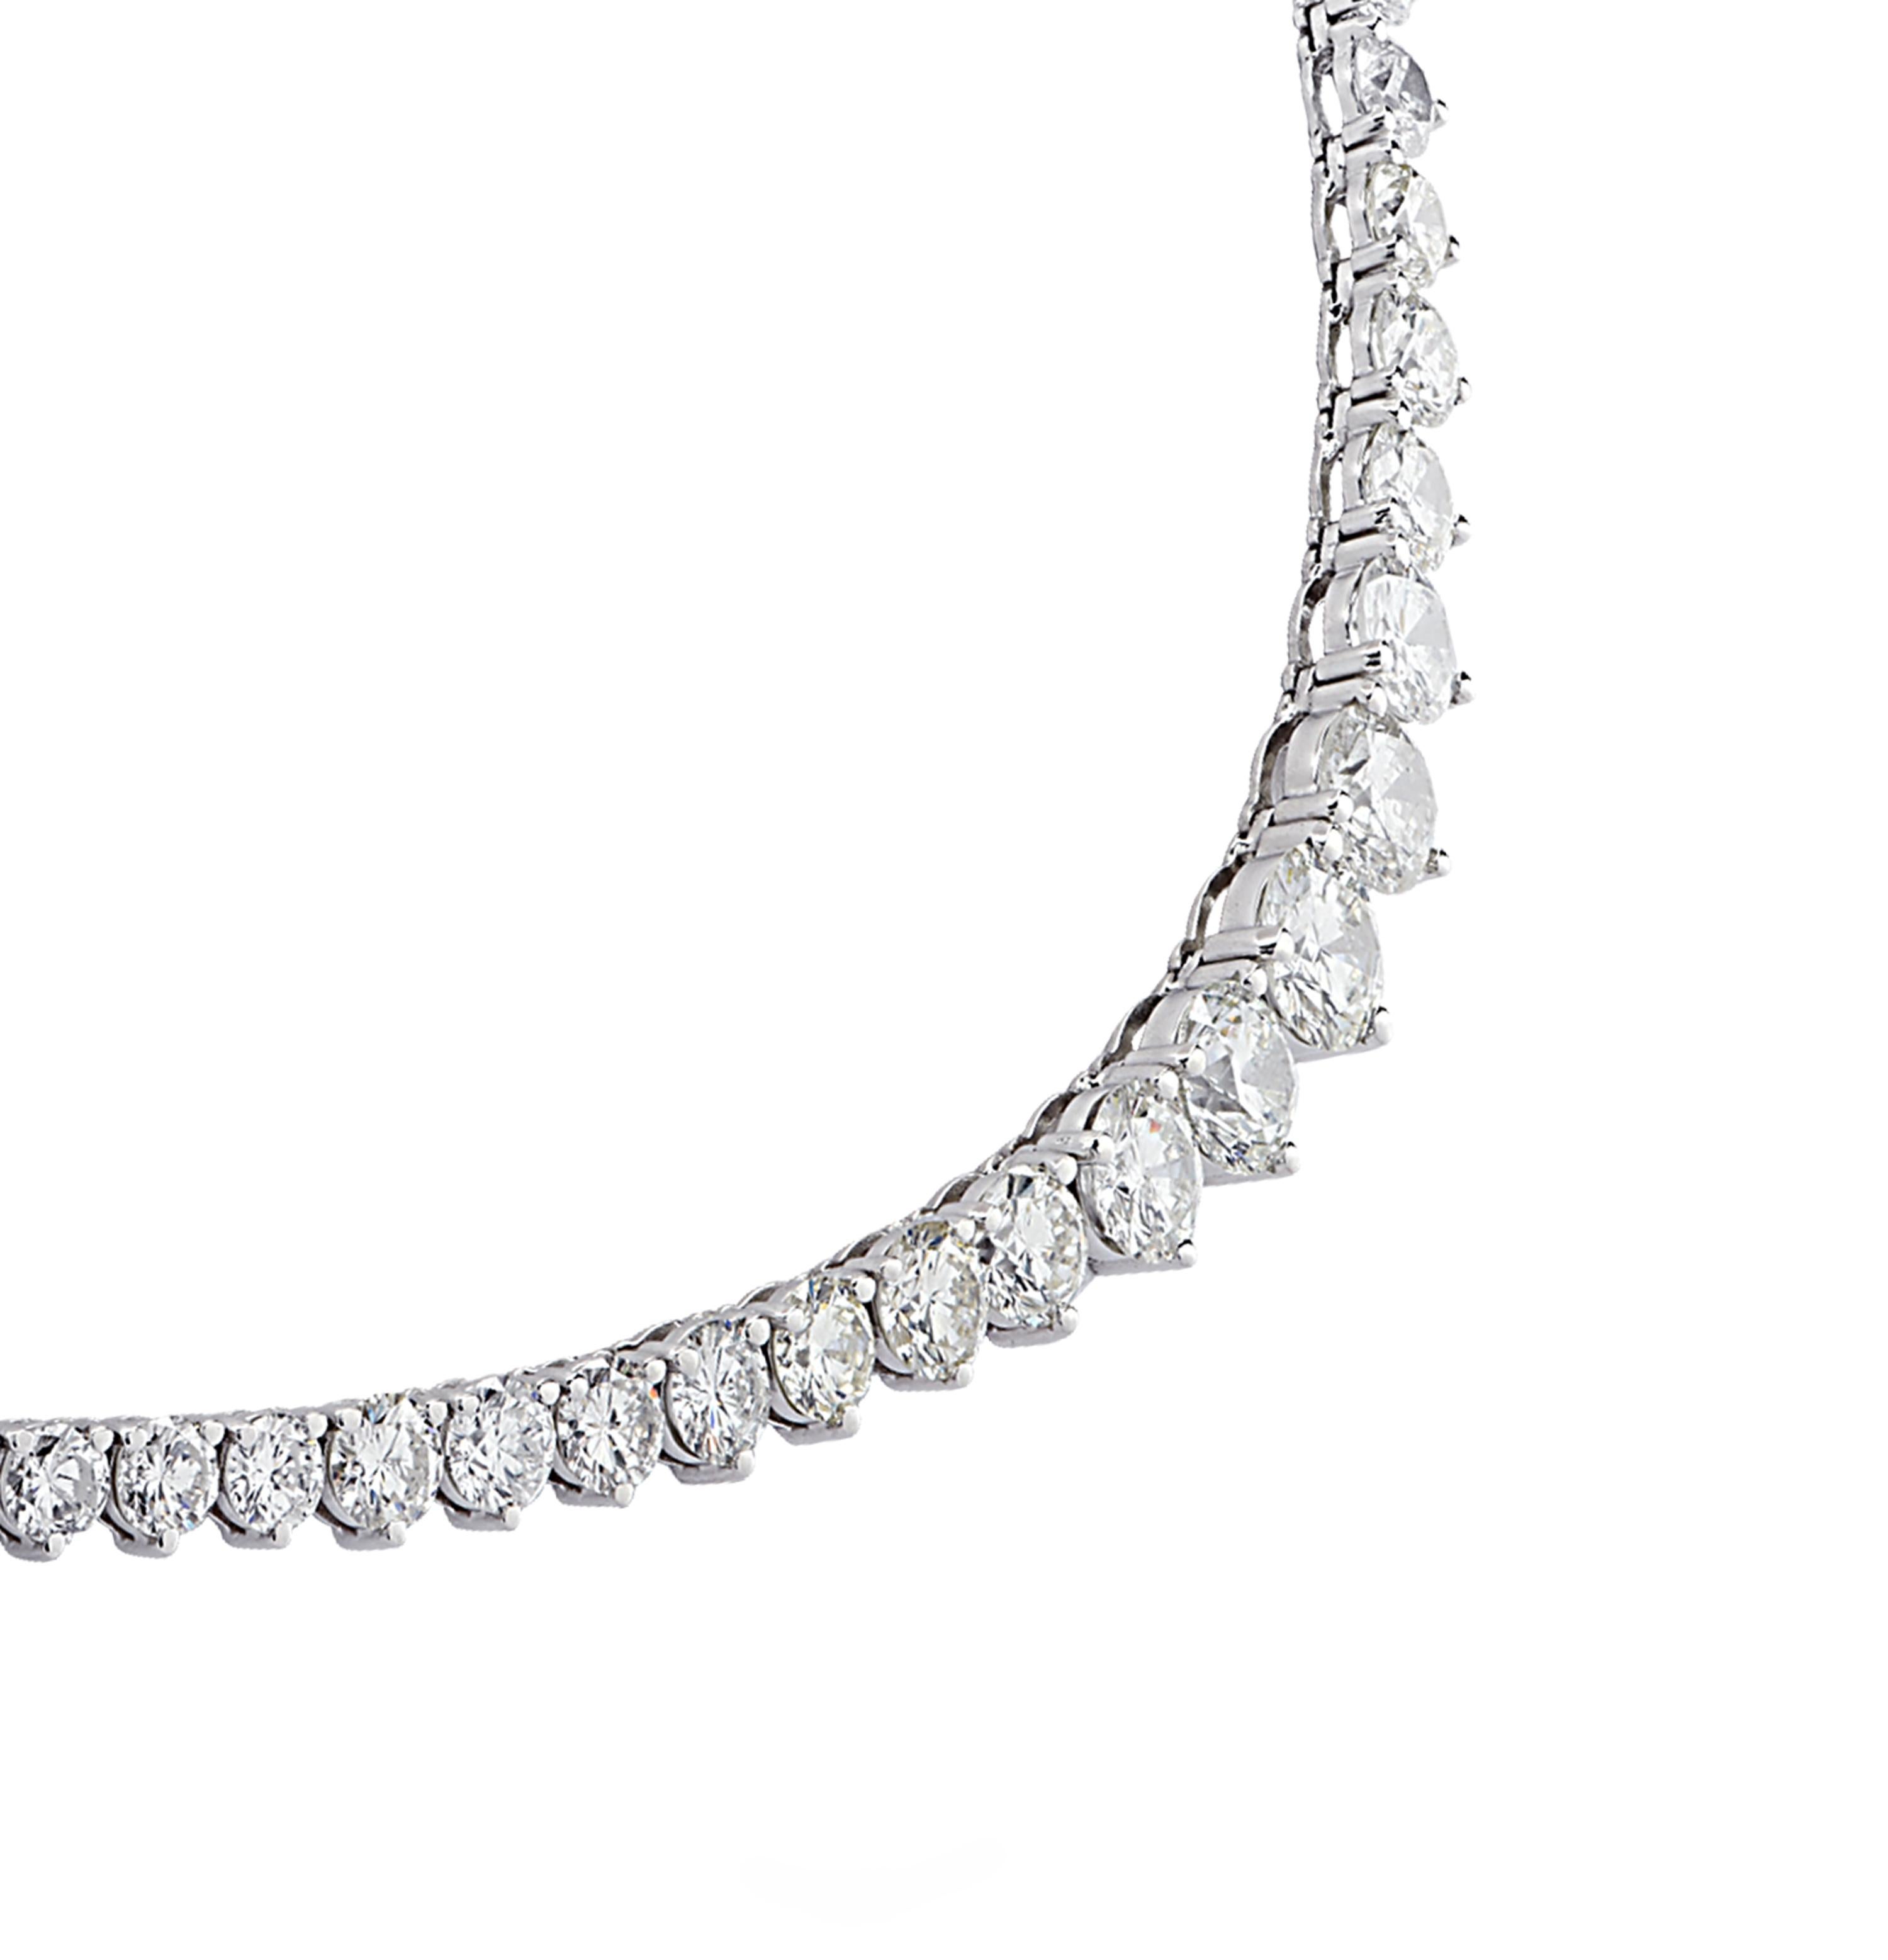 Exquisite Vivid Diamonds diamond necklace crafted in 18 karat white gold, showcasing 102 round brilliant cut diamonds weighing 22.7 carats total, H-I color, VS-SI Clarity, graduating in size. Four of the diamonds are certified by the GIA. The